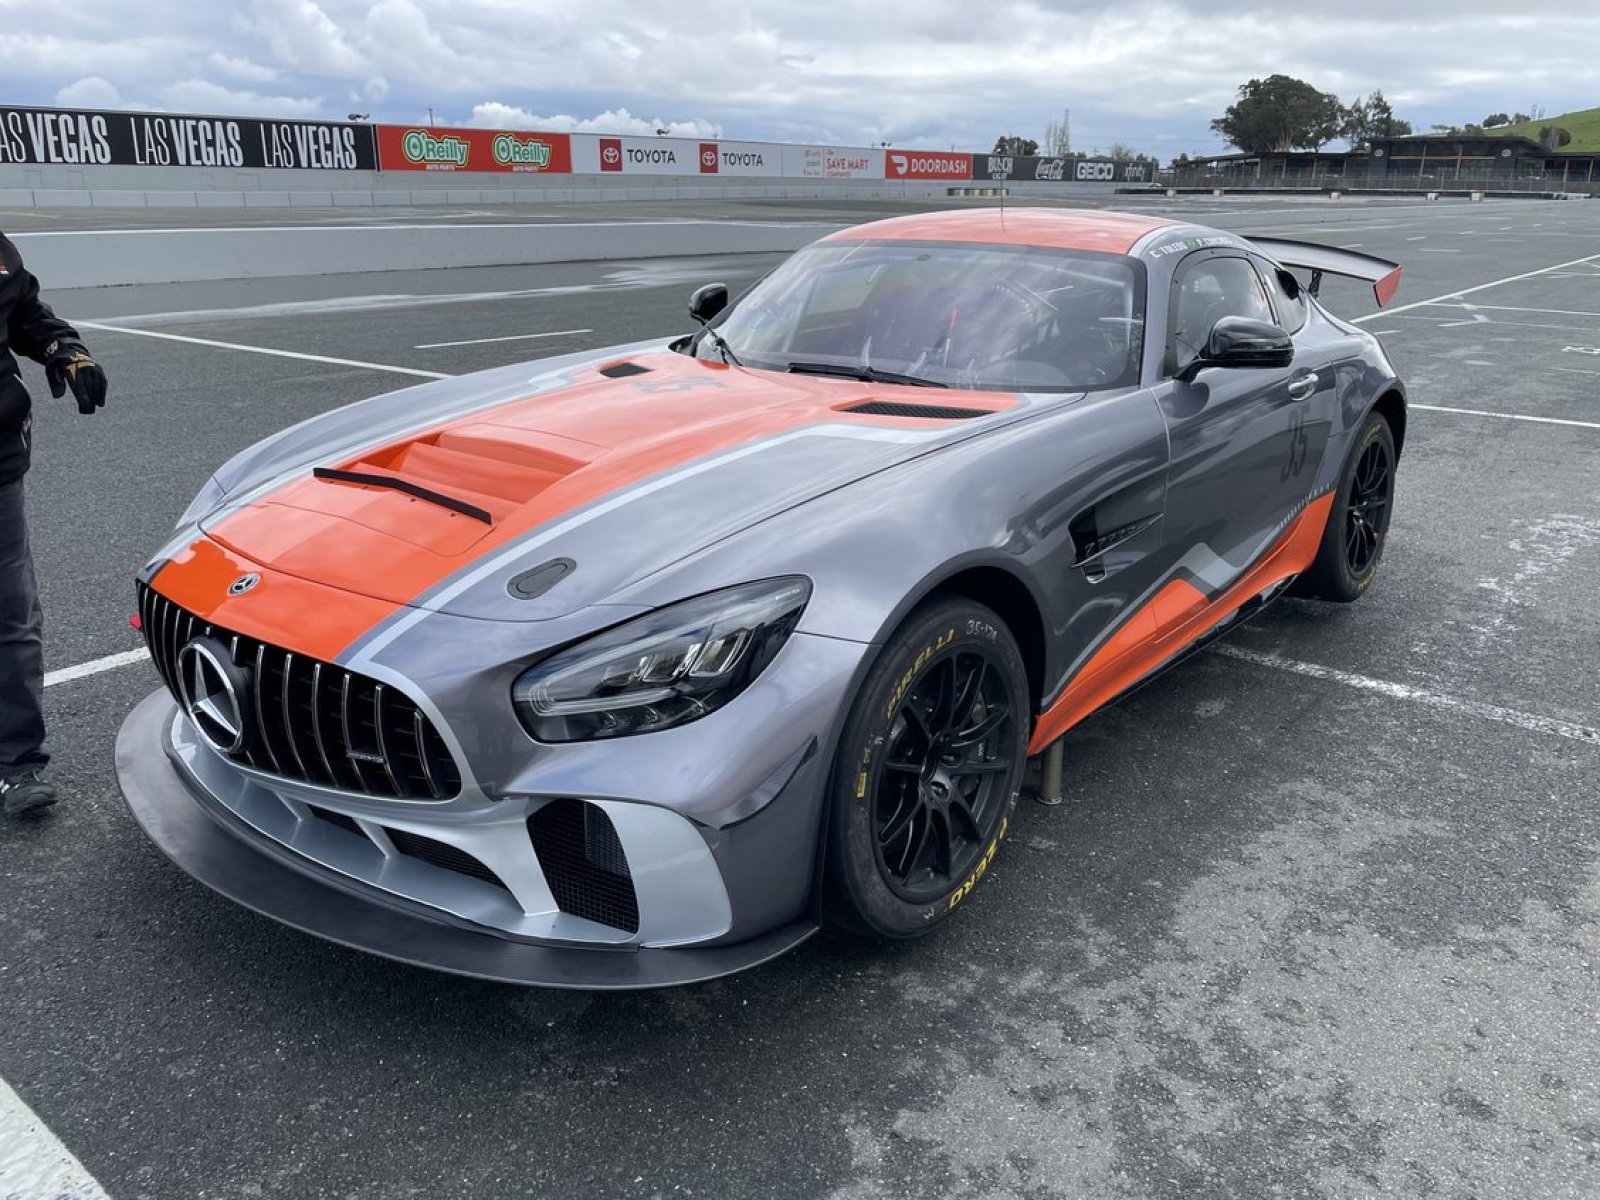 CONQUEST RACING IS EXCITED TO FIELD A PAIR OF MERCEDES-AMG GT4 IN THE HIGHLY COMPETITIVE GT4 AMERICA SERIES